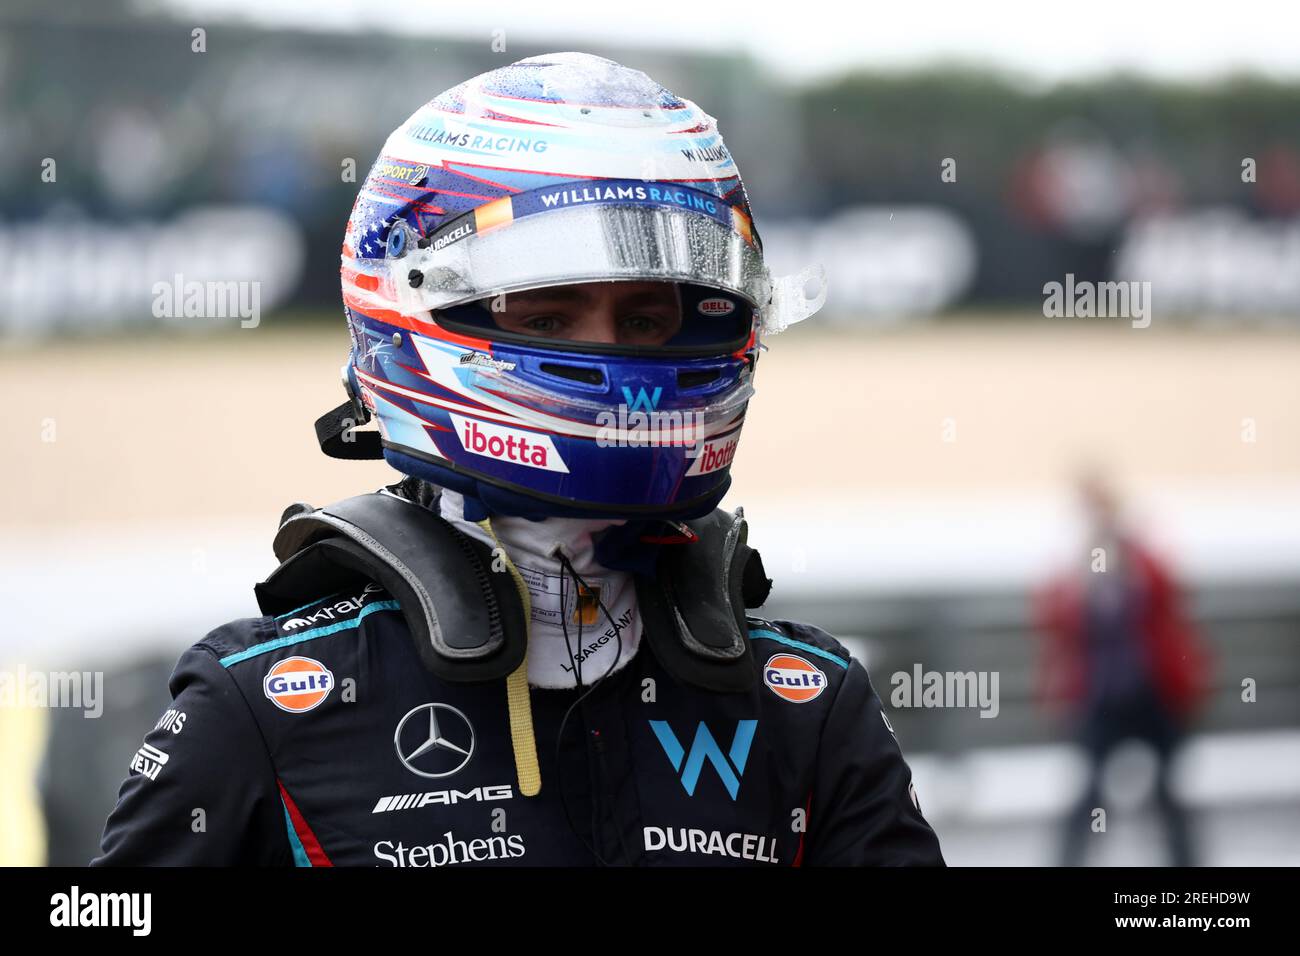 Stavelot, Belgium. 28th July, 2023. Logan Sargeant of Williams Racing after the crash during free practice ahead of the F1 Grand Prix of Belgium at Spa Francorchamps on July 28, 2023 Stavelot, Belgium. Credit: Marco Canoniero/Alamy Live News Stock Photo